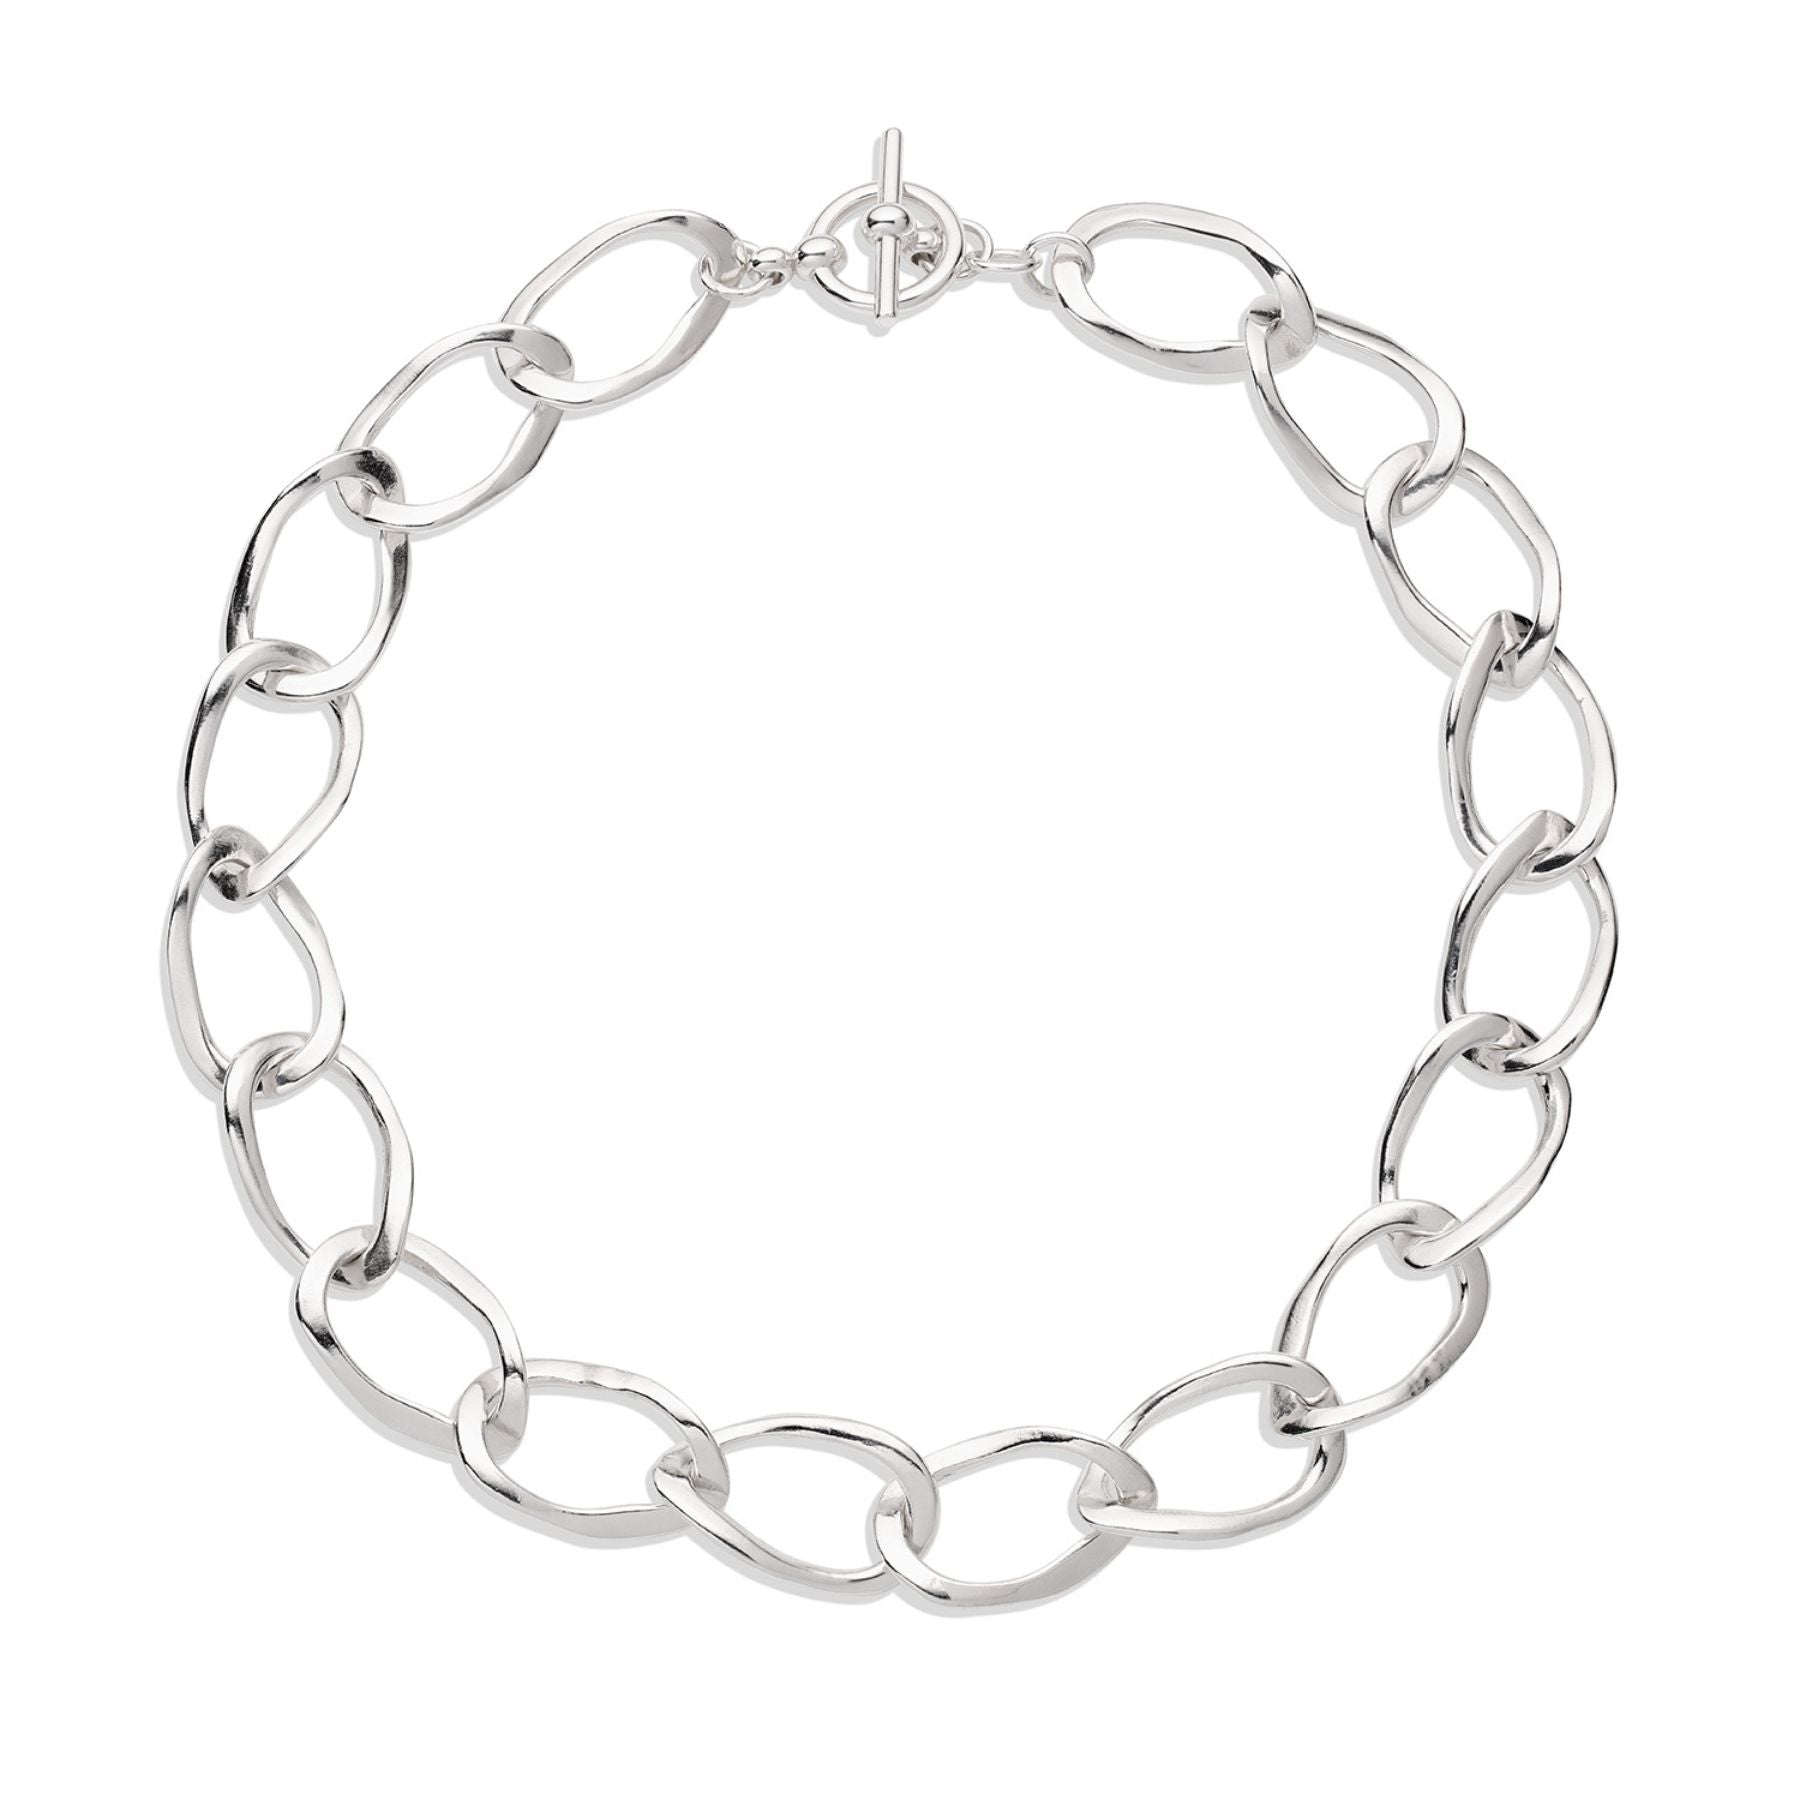 Chunky sculptural necklace with a toggle clasp in sterling silver.